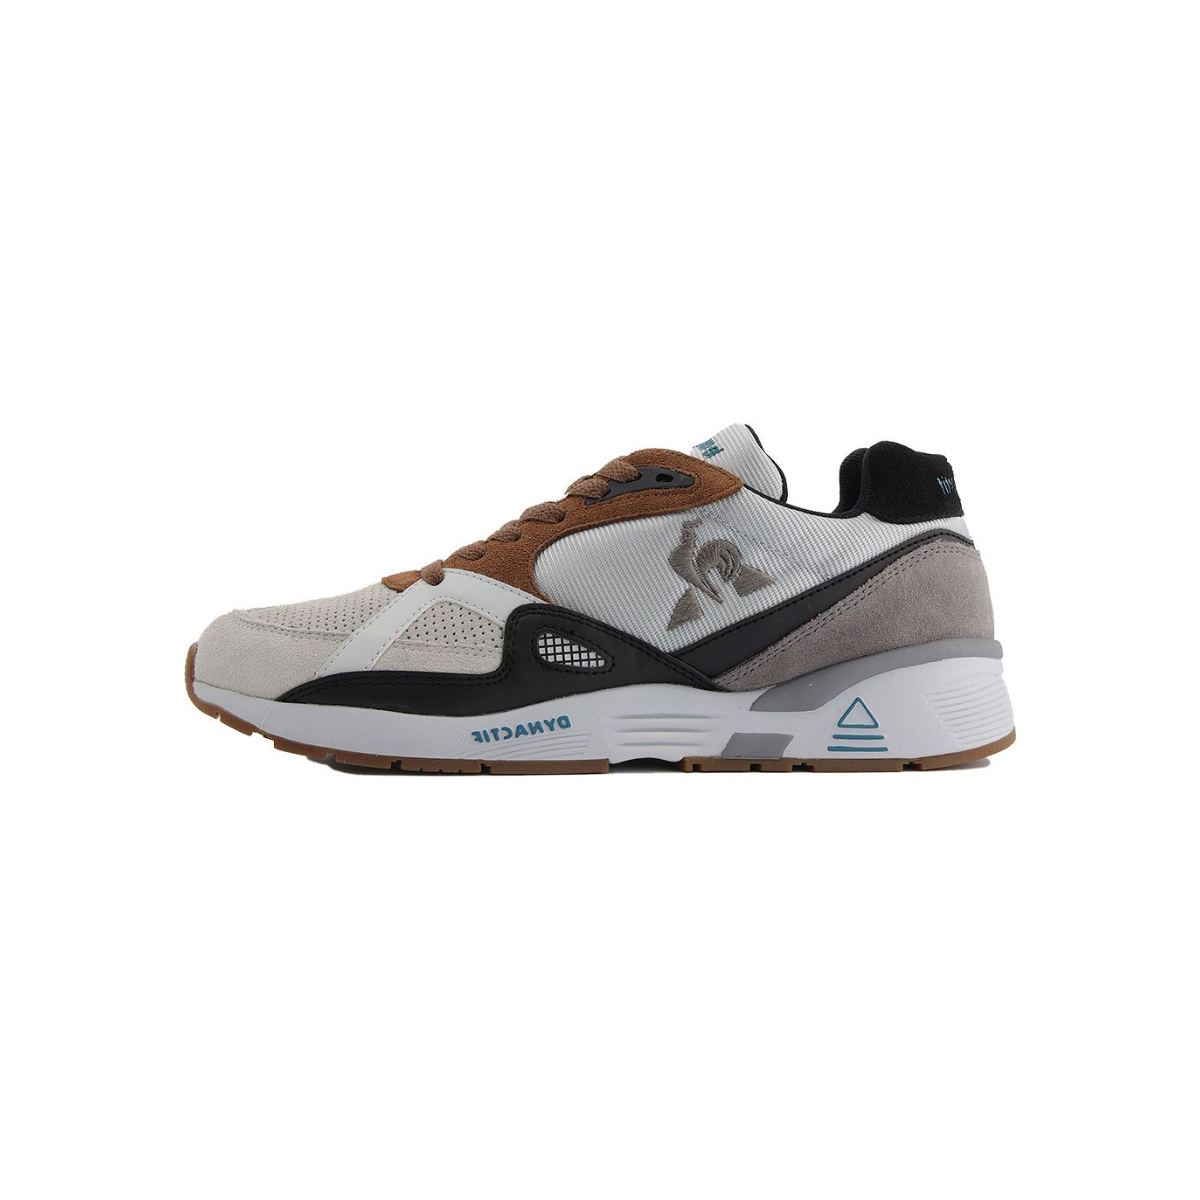 Le Coq Sportif LCS R850 Winter Craft (Galet) 2220268